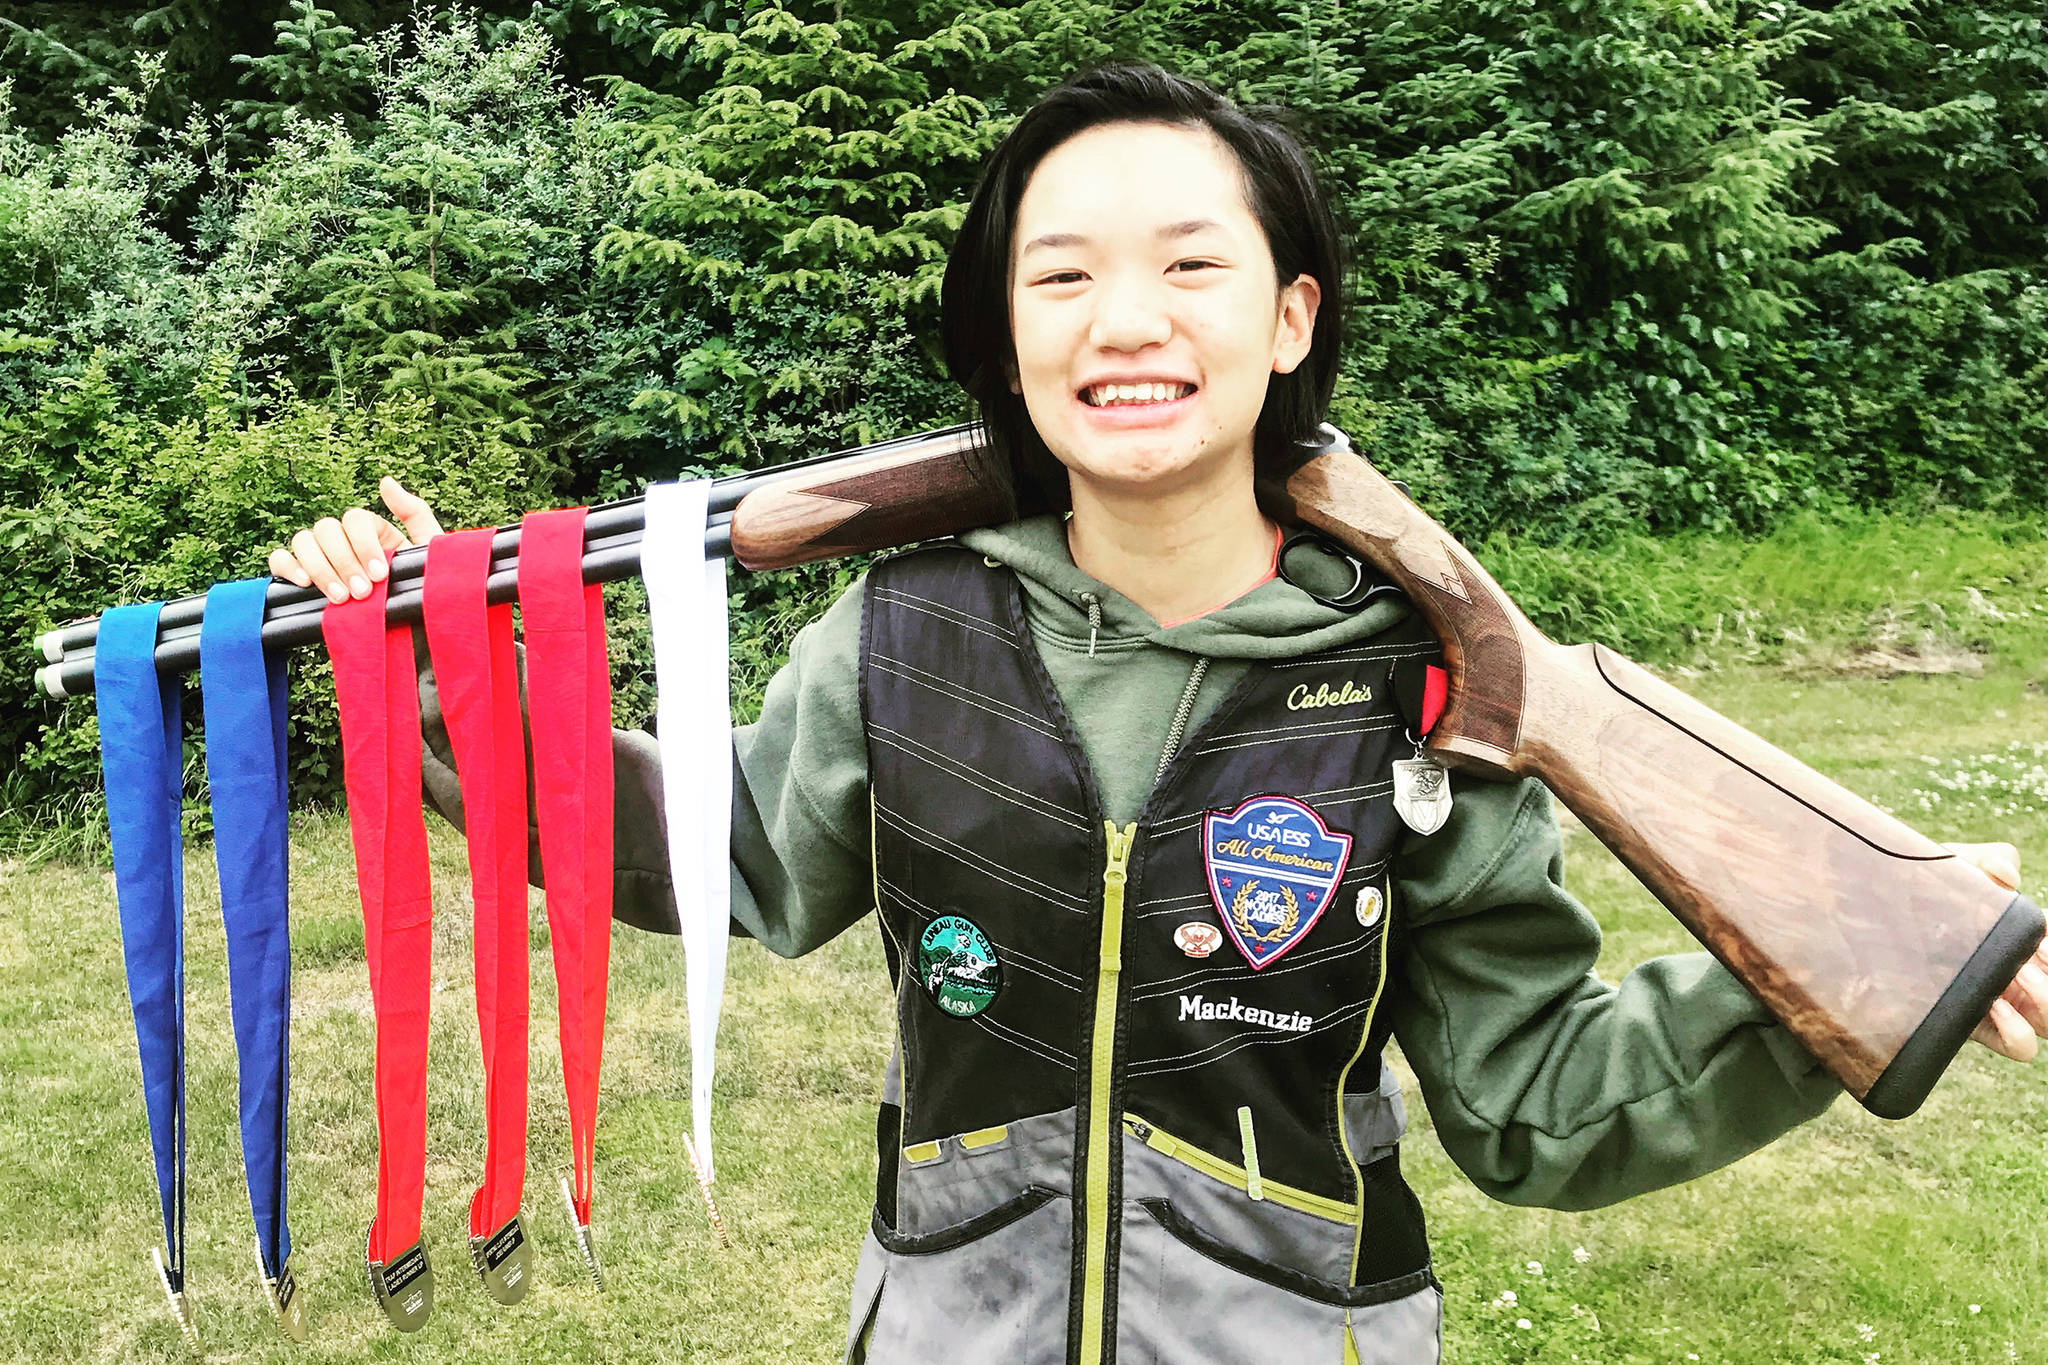 Juneau Trap Team’s Mackenzie Lam poses with the medals she won at the USA YESS National Junior Clay Target Championships in Juneau earlier this week. (Courtesy Photo | Marie Lam)